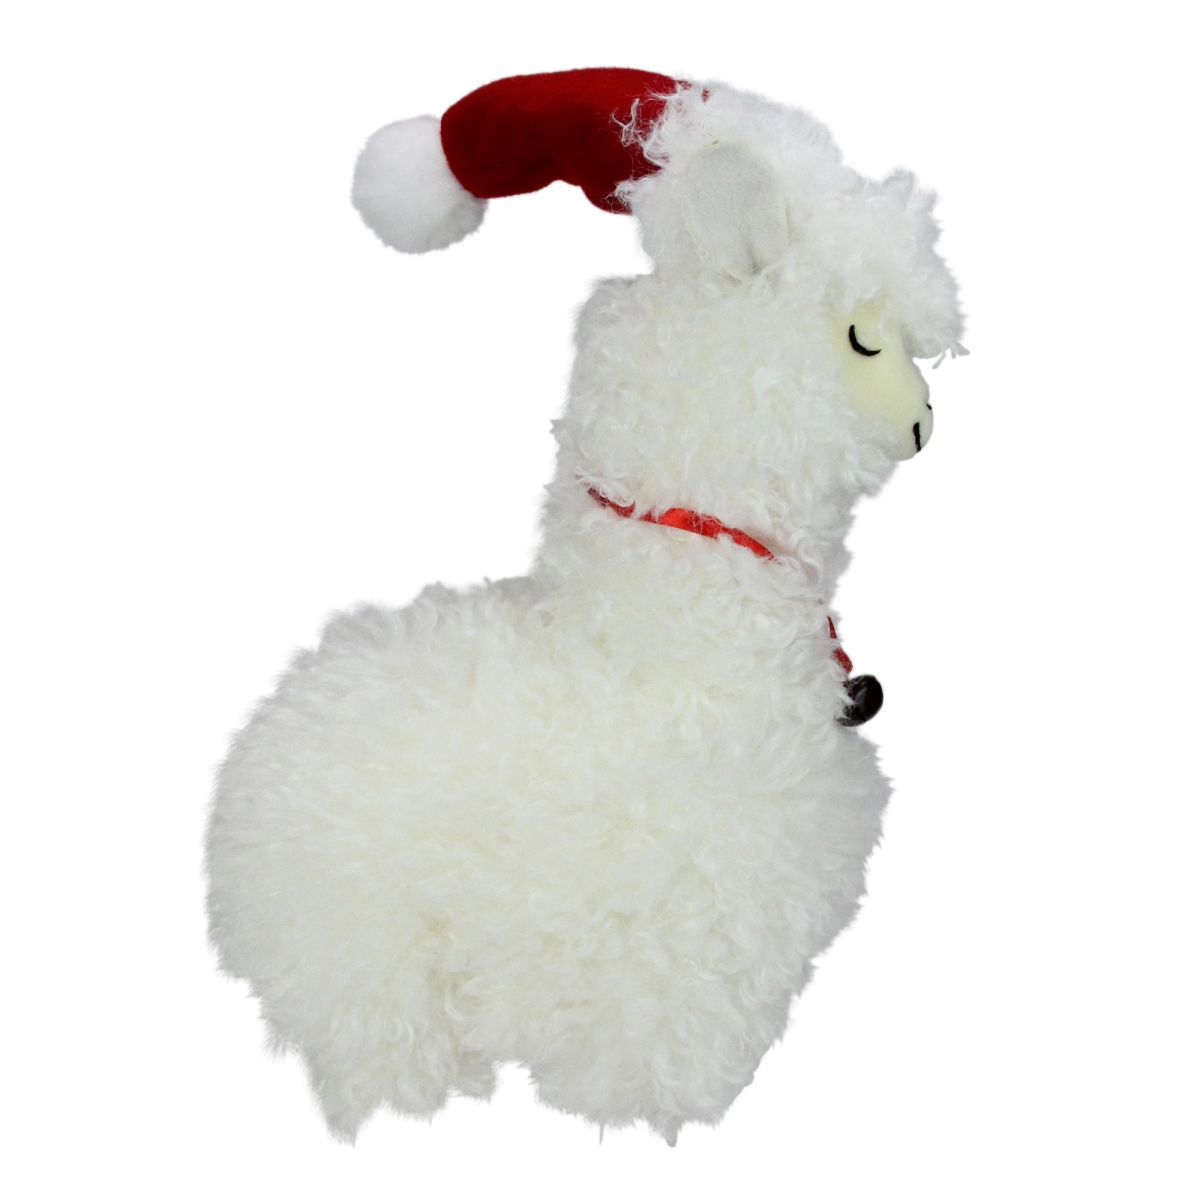 32913474 13 In. Plush Standing Llama With Jingle Bell Necklace Christmas Tabletop Figure